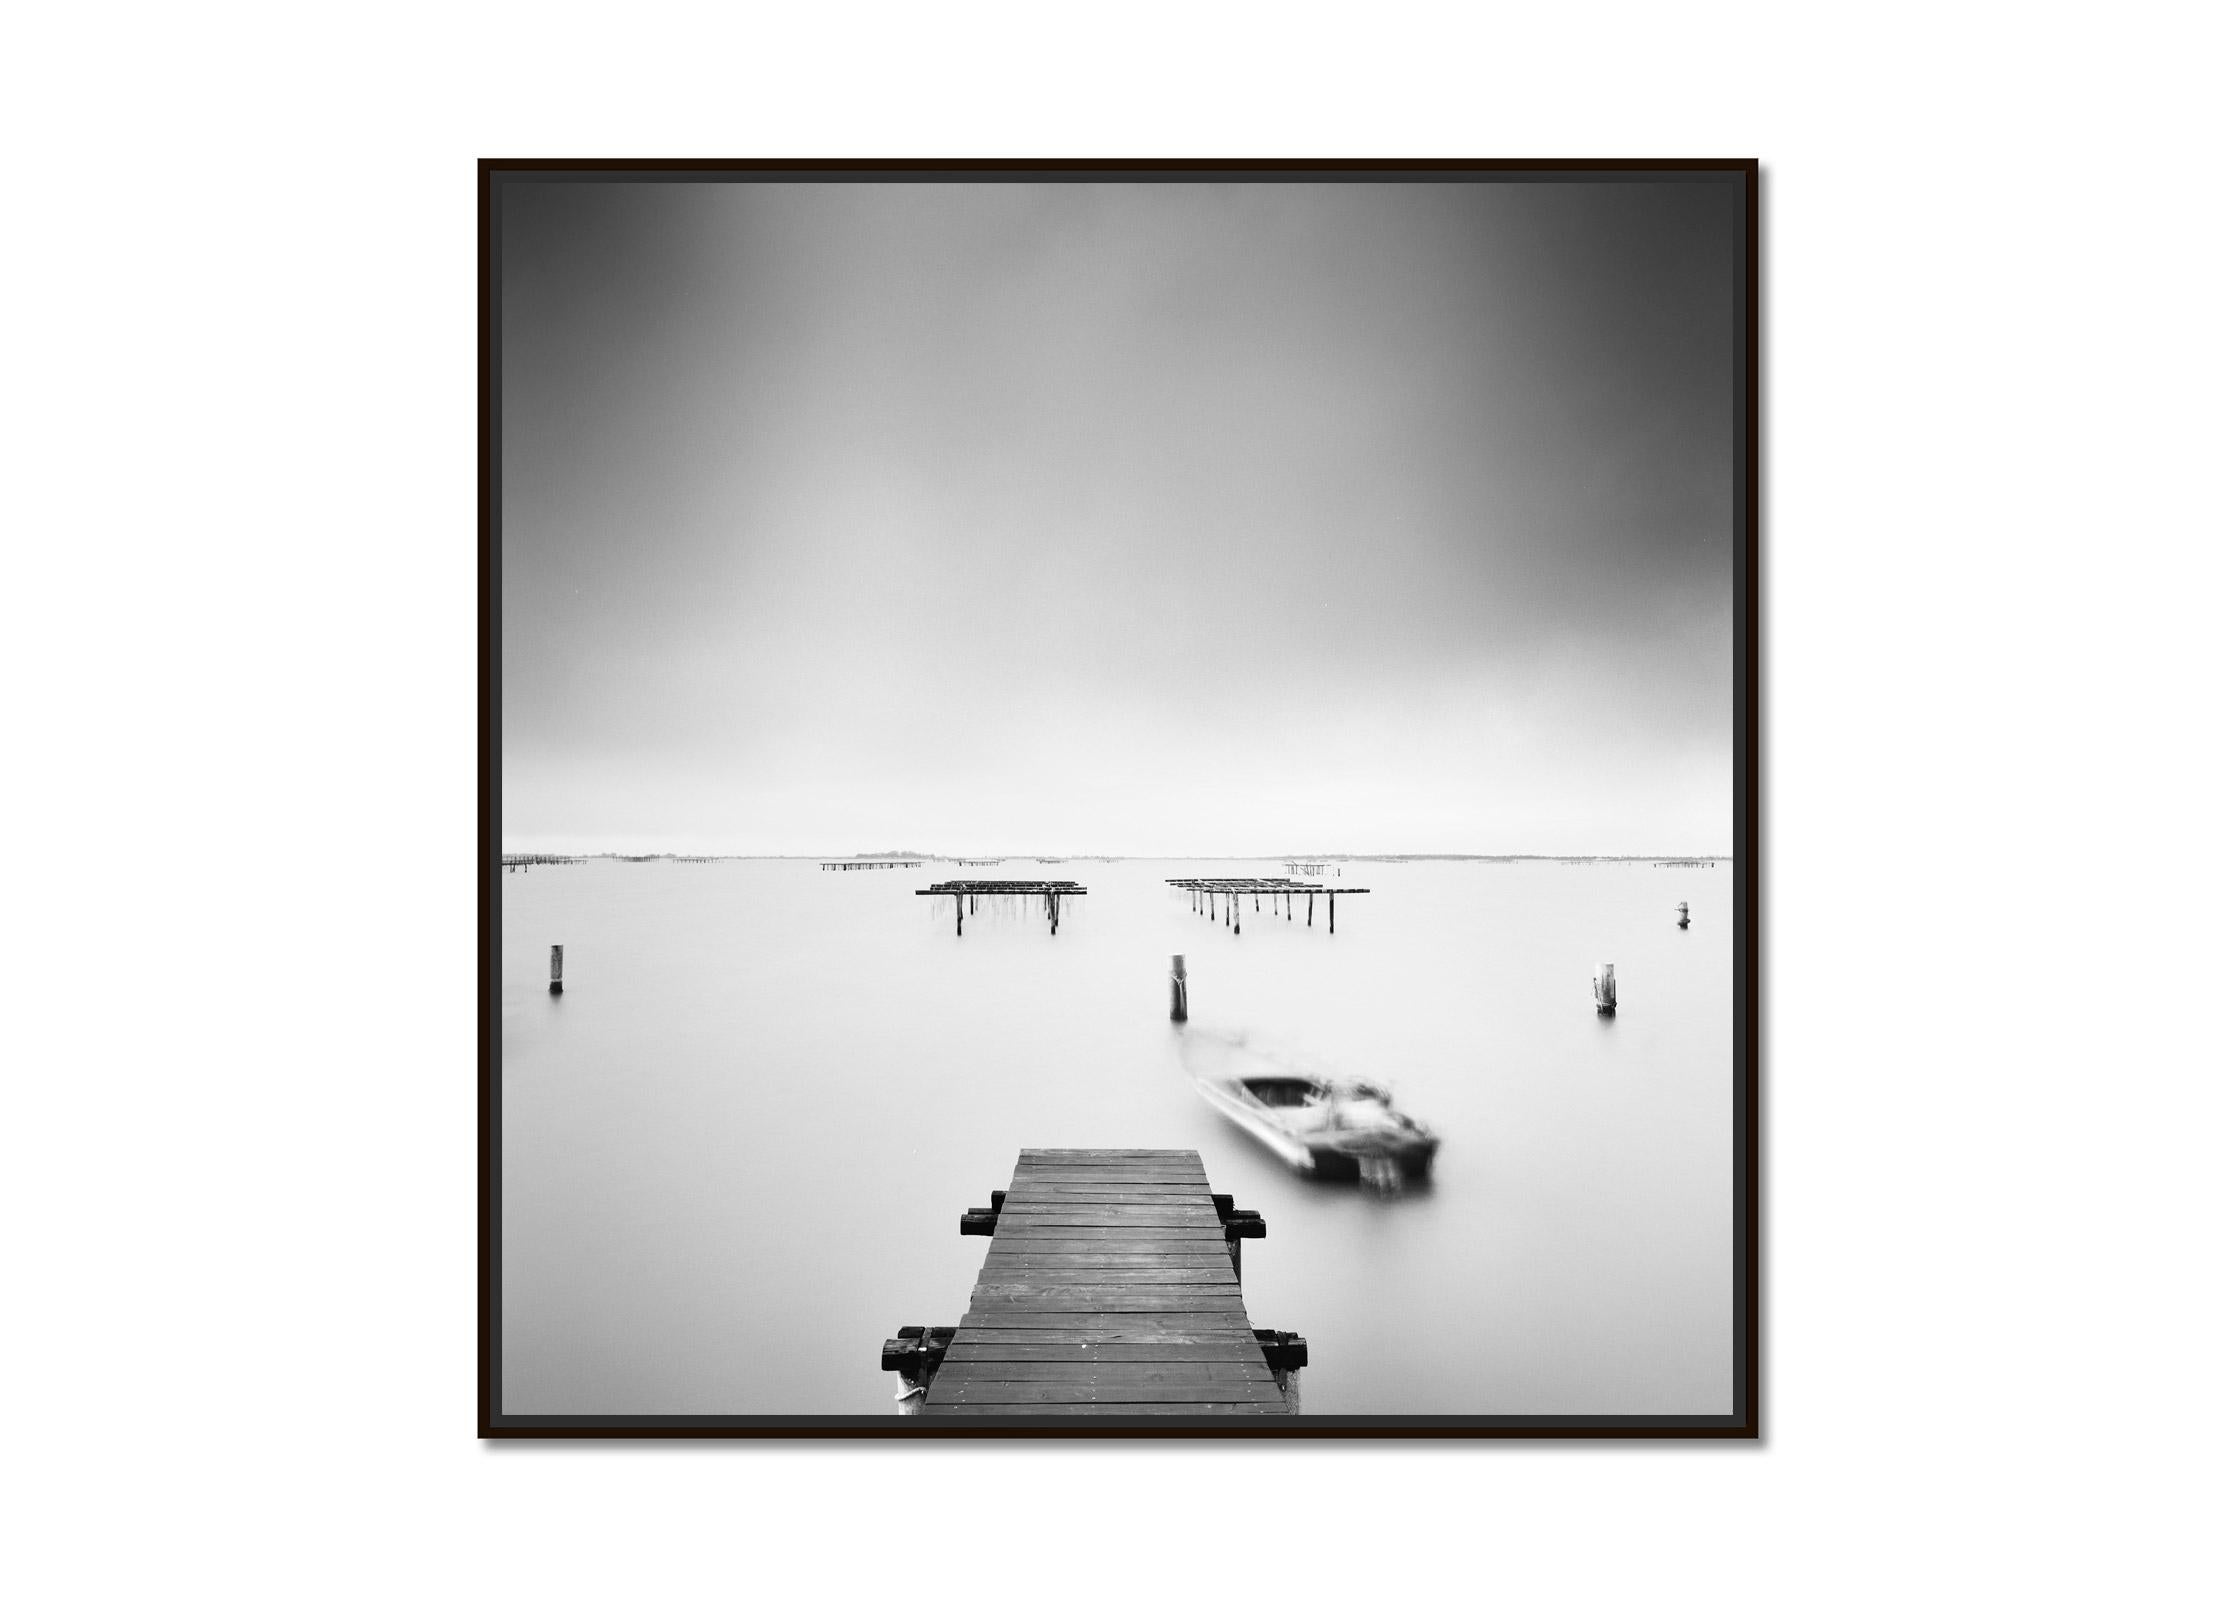 Aquaculture Structures, Boat, Fishing, black and white waterscape photography - Photograph by Gerald Berghammer